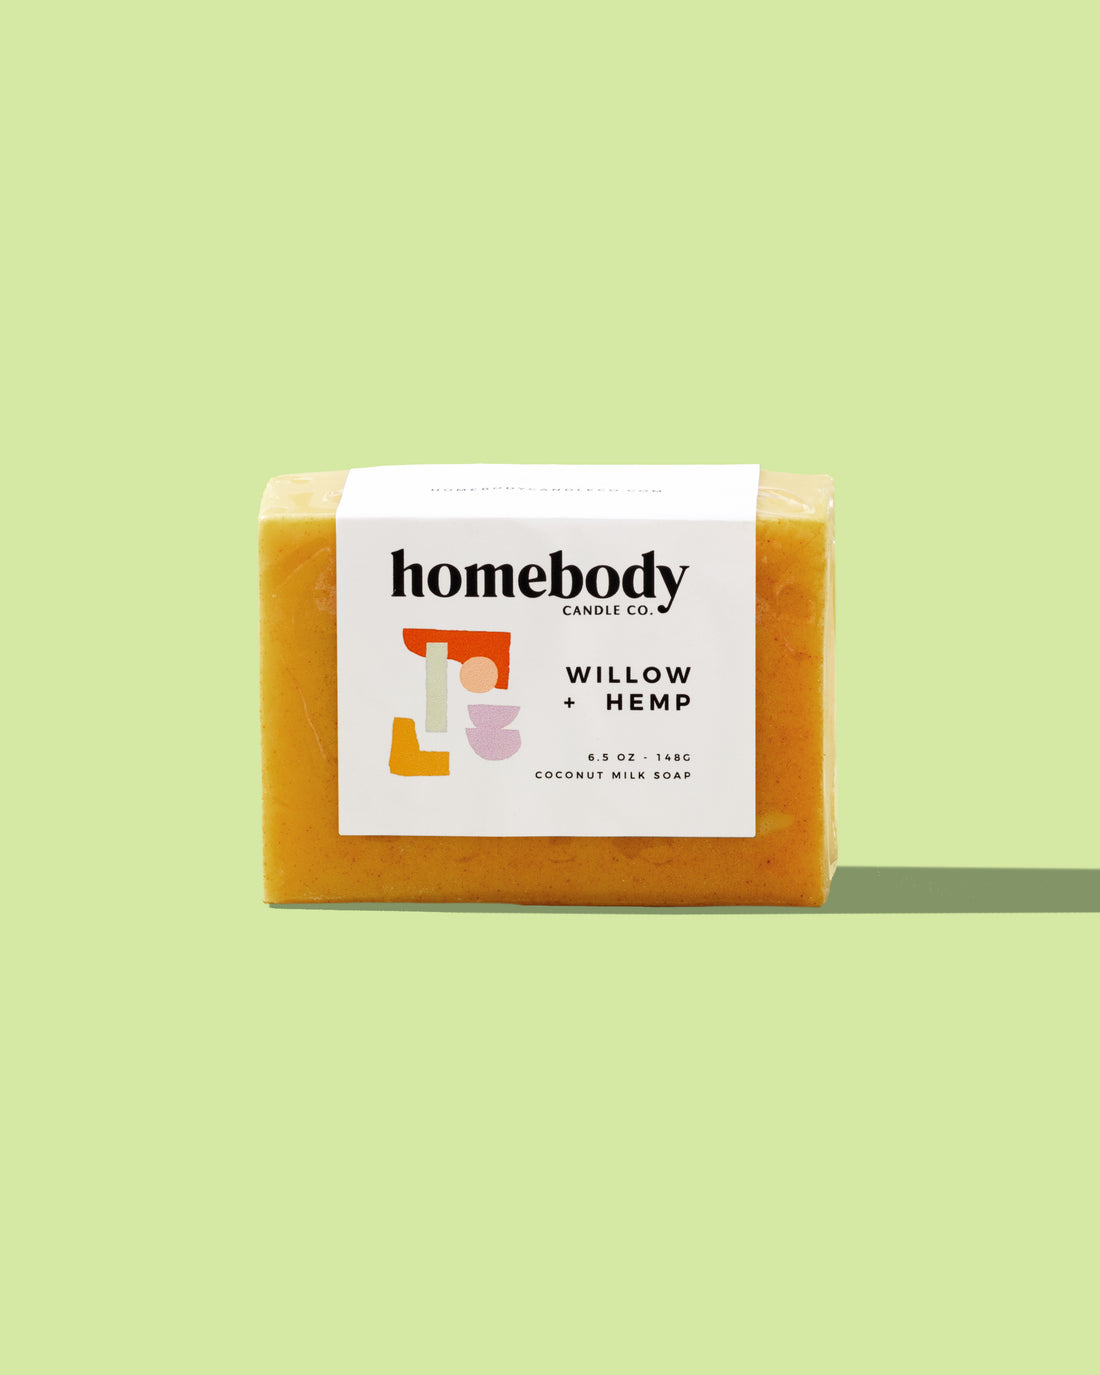 Willow + Hemp milk soap Homebody Candle Co